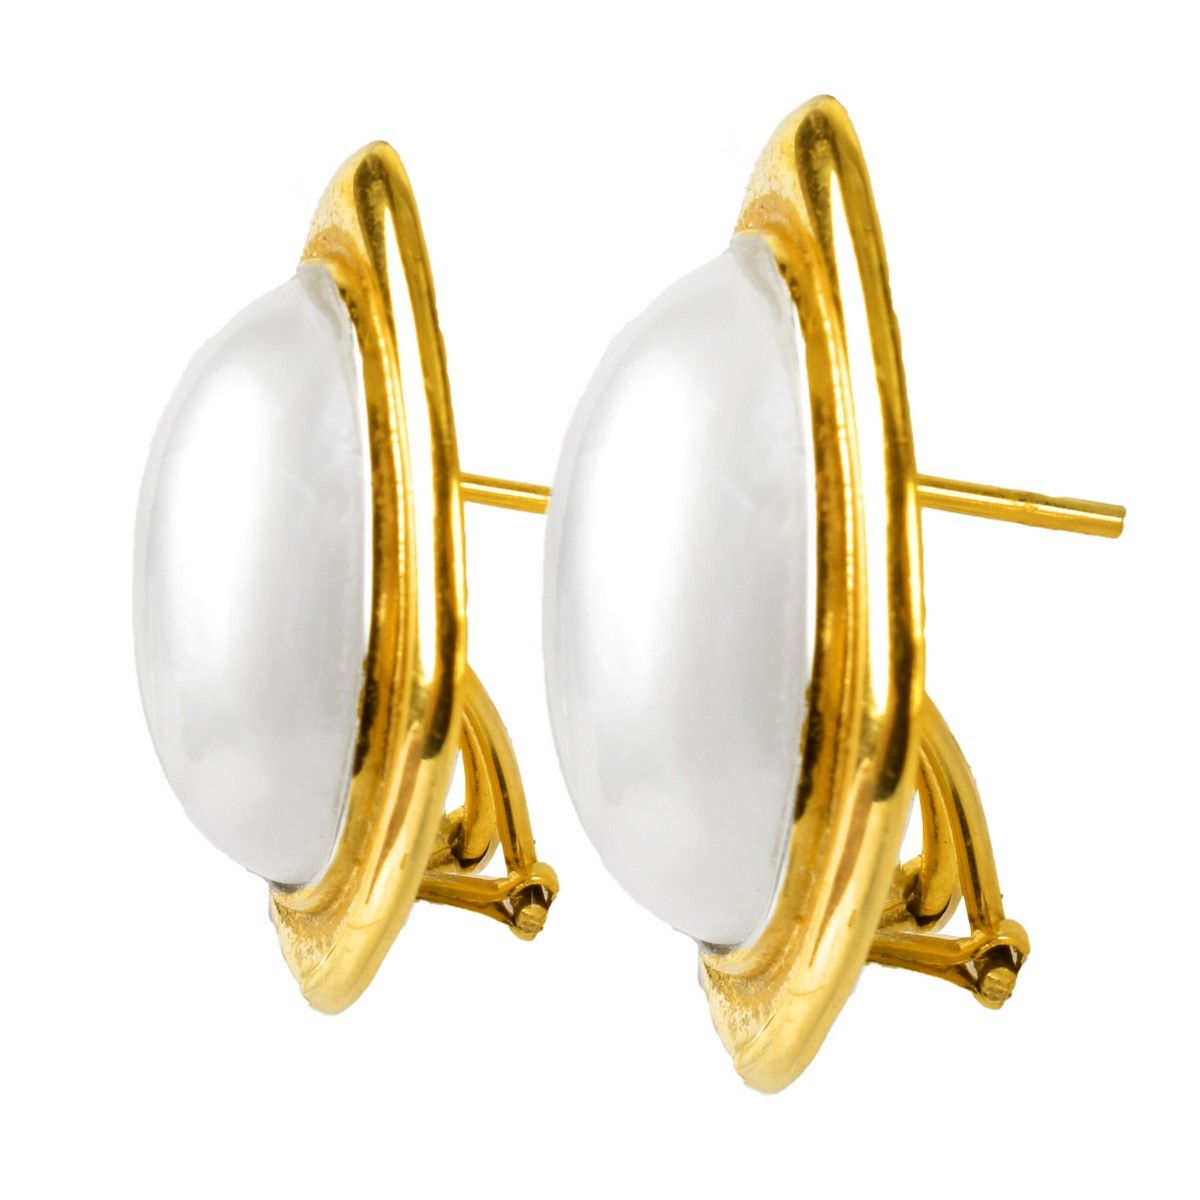 Vintage Mabe Pearl and 14K Gold Earrings